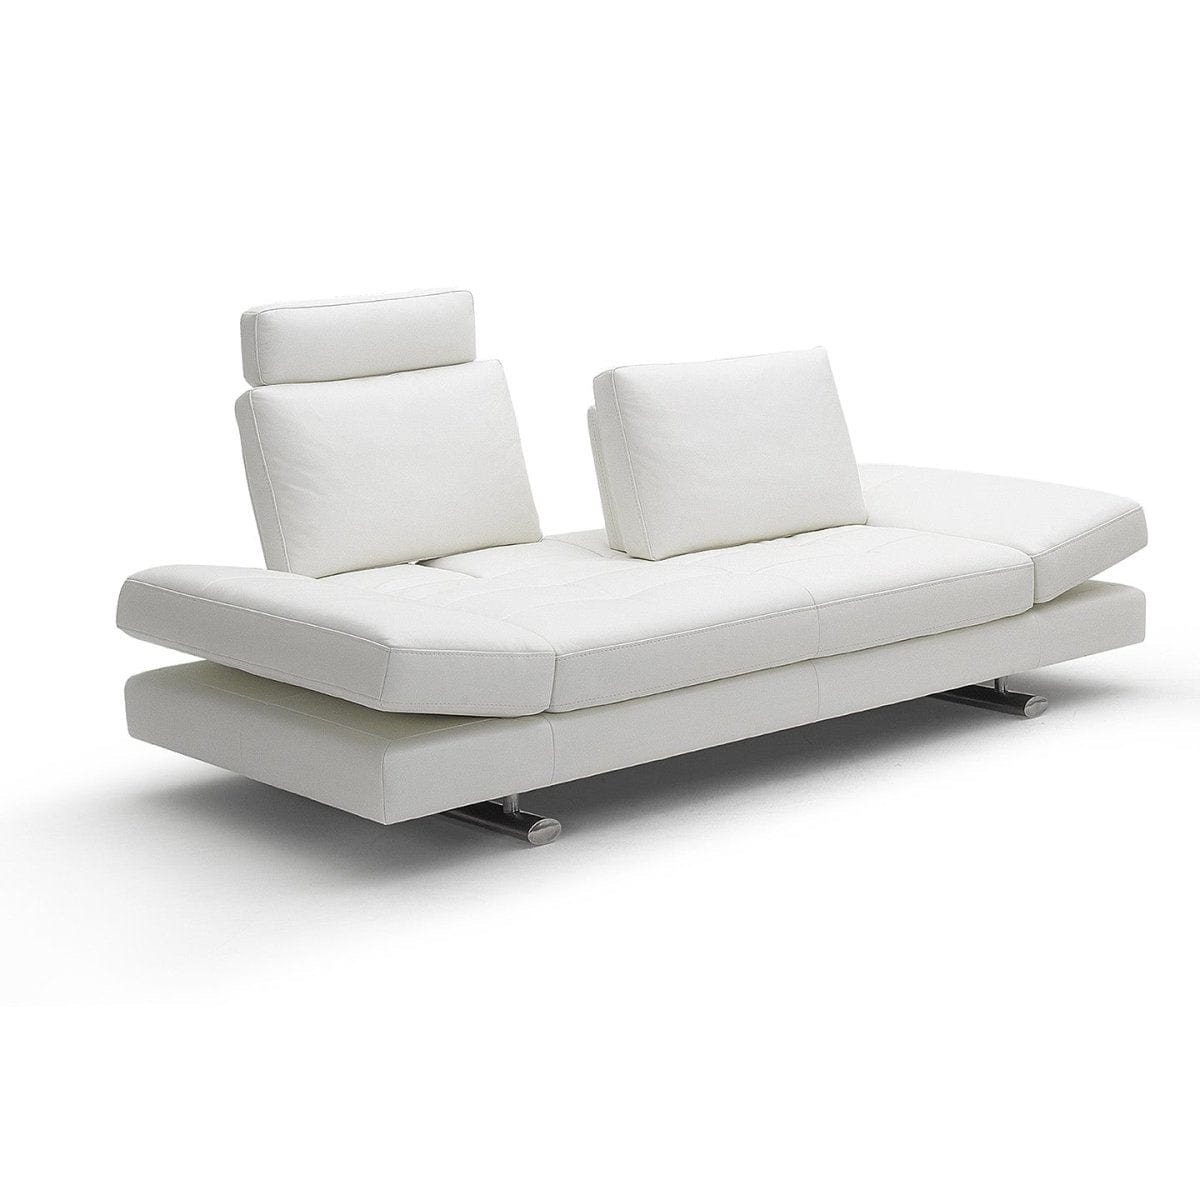 #1 KUKA #1372 Top-Grain Leather 2-Seater Daybed Sofa with Adjustable Backrests &amp; Side Arms (Color: BL5652) picket and rail